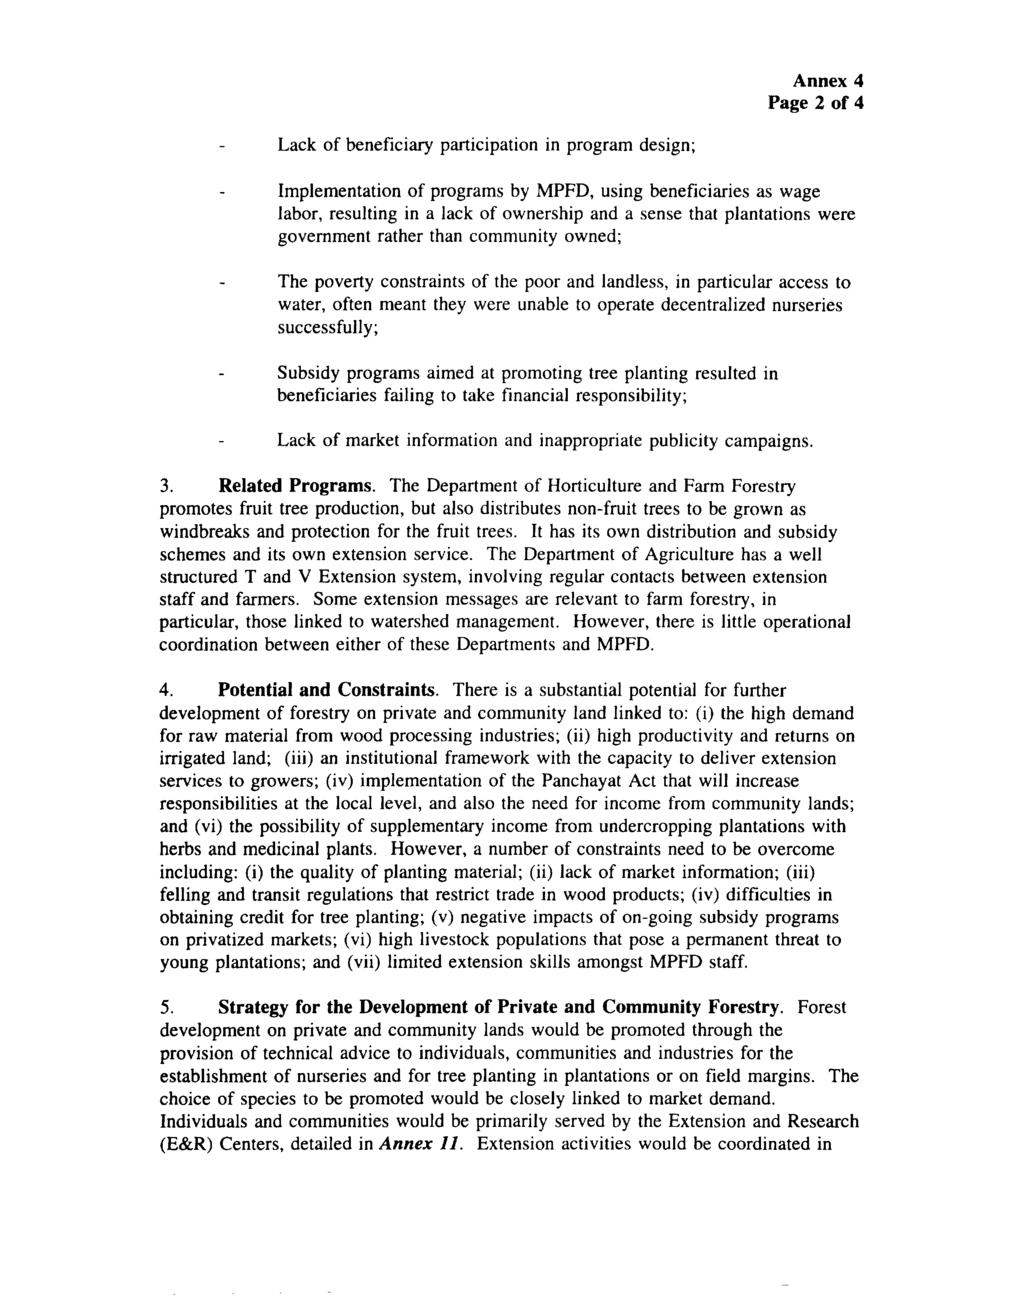 Annex 4 Page 2 of 4 Lack of beneficiary participation in program design; Implementation of programs by MPFD, using beneficiaries as wage labor, resulting in a lack of ownership and a sense that